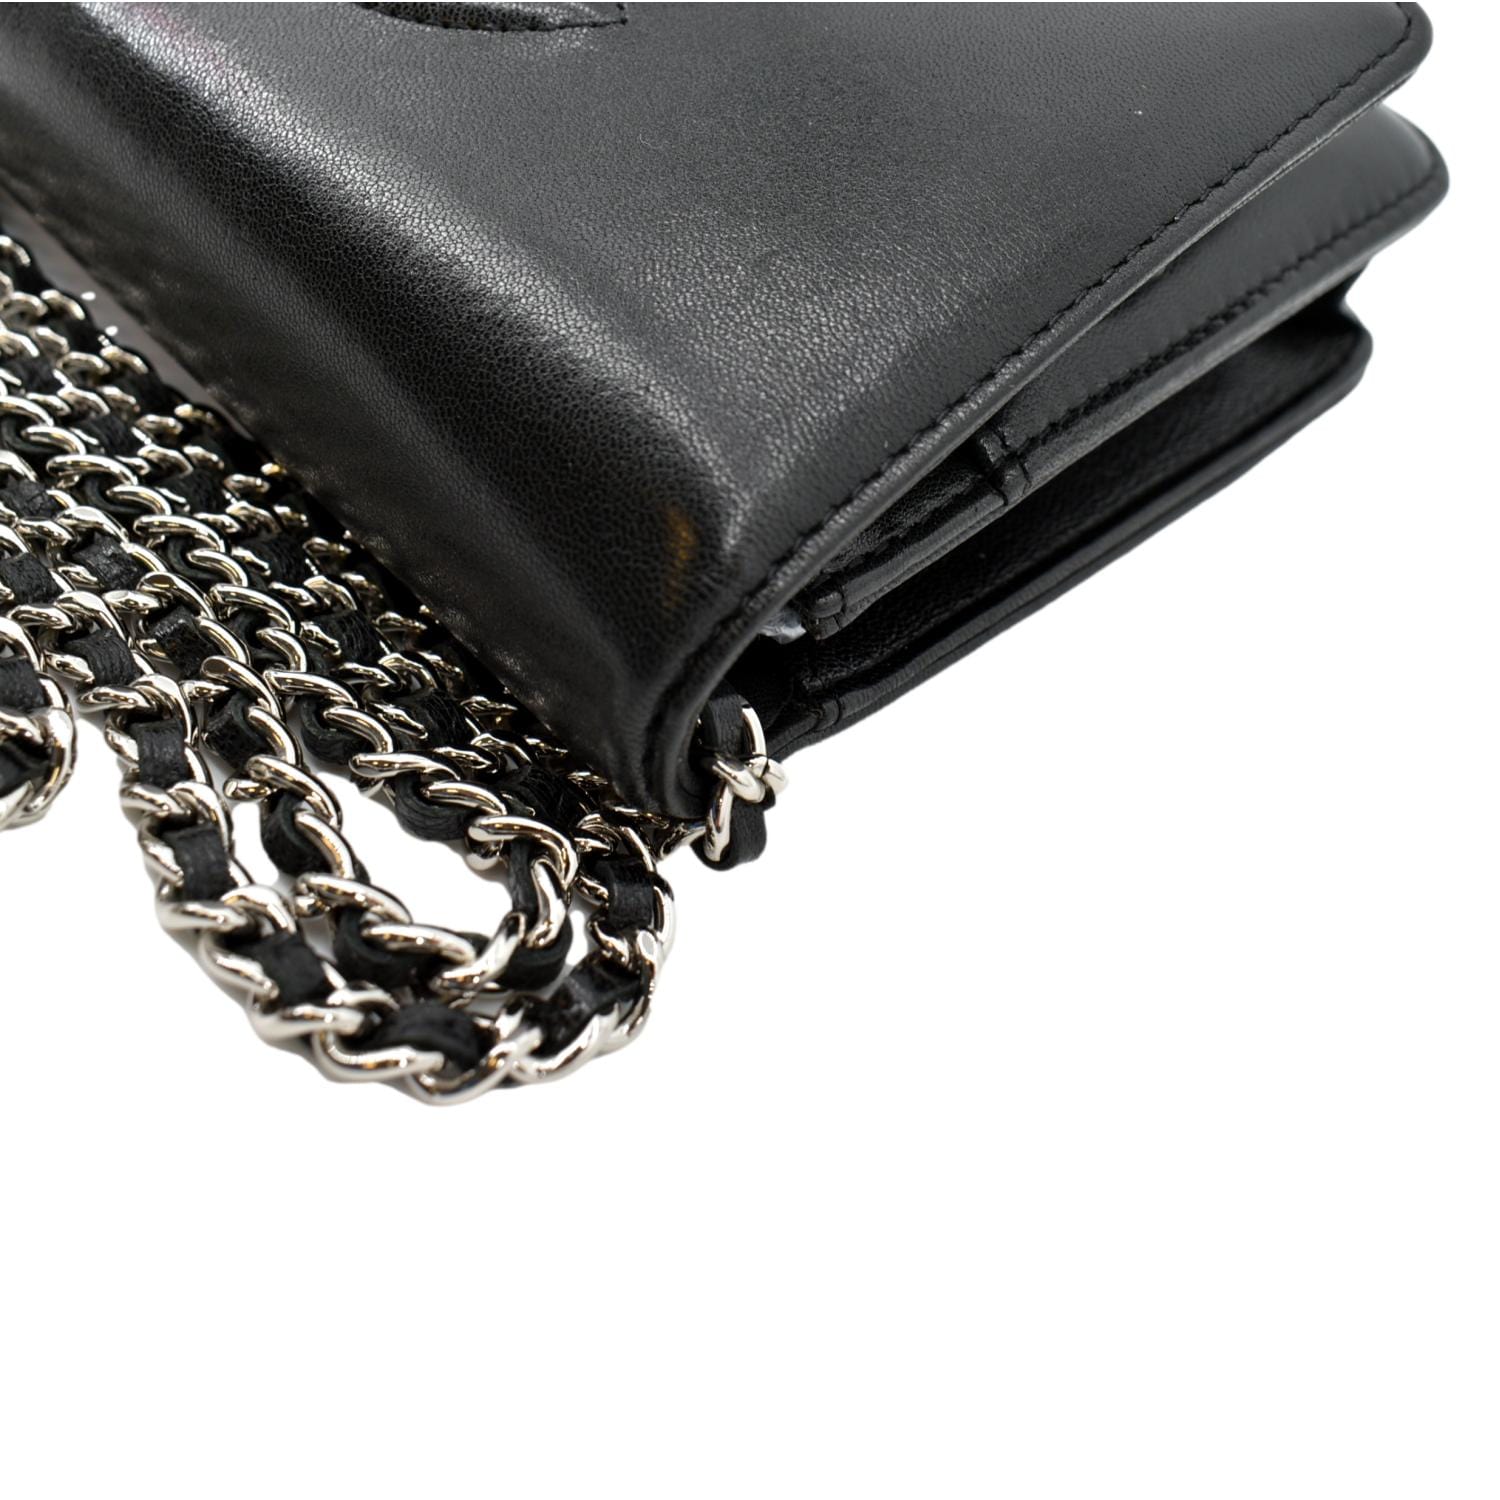 Wallet on chain timeless/classique patent leather crossbody bag